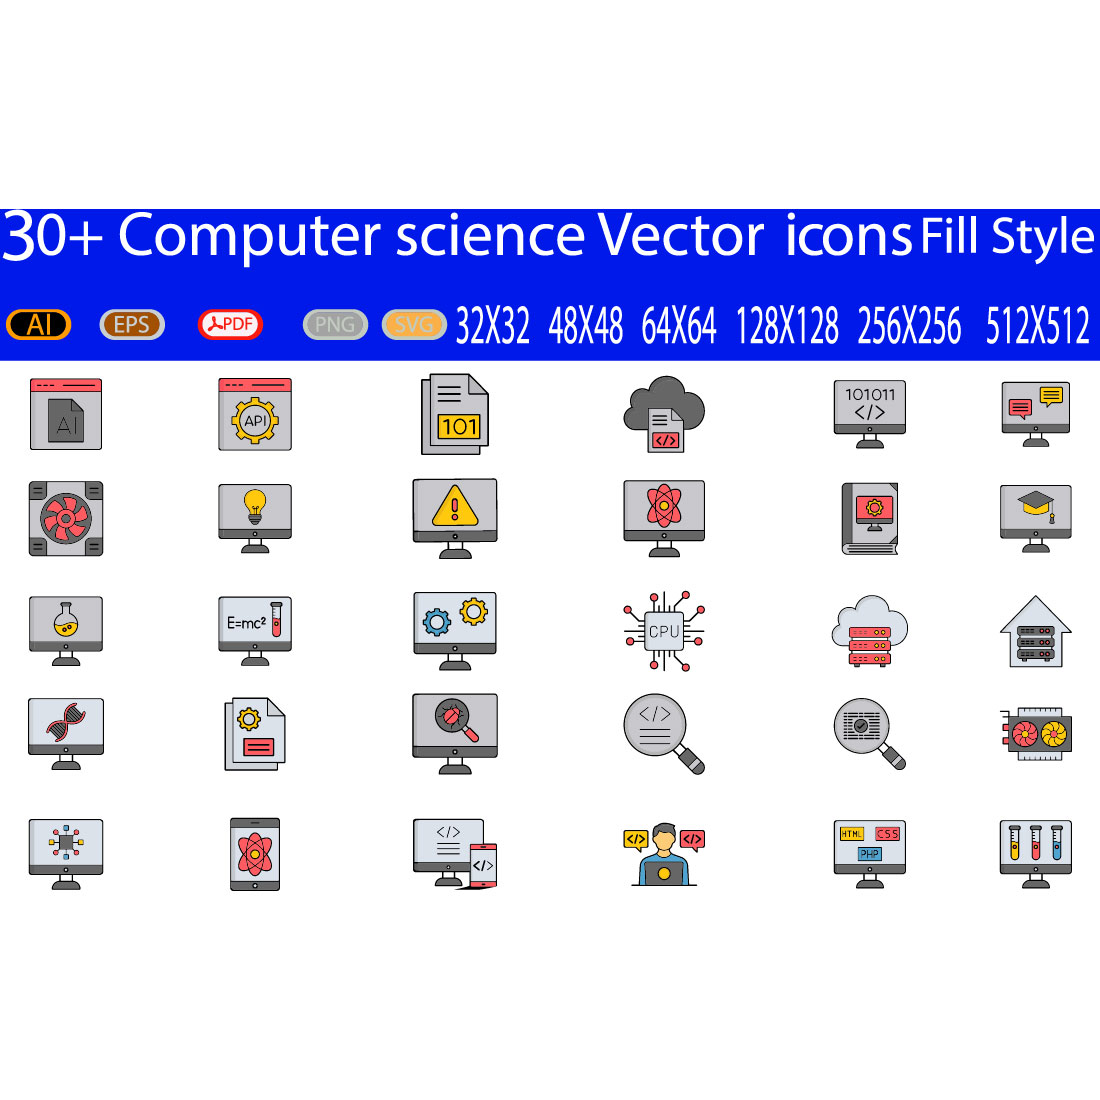 Computer science icon set on a white background.